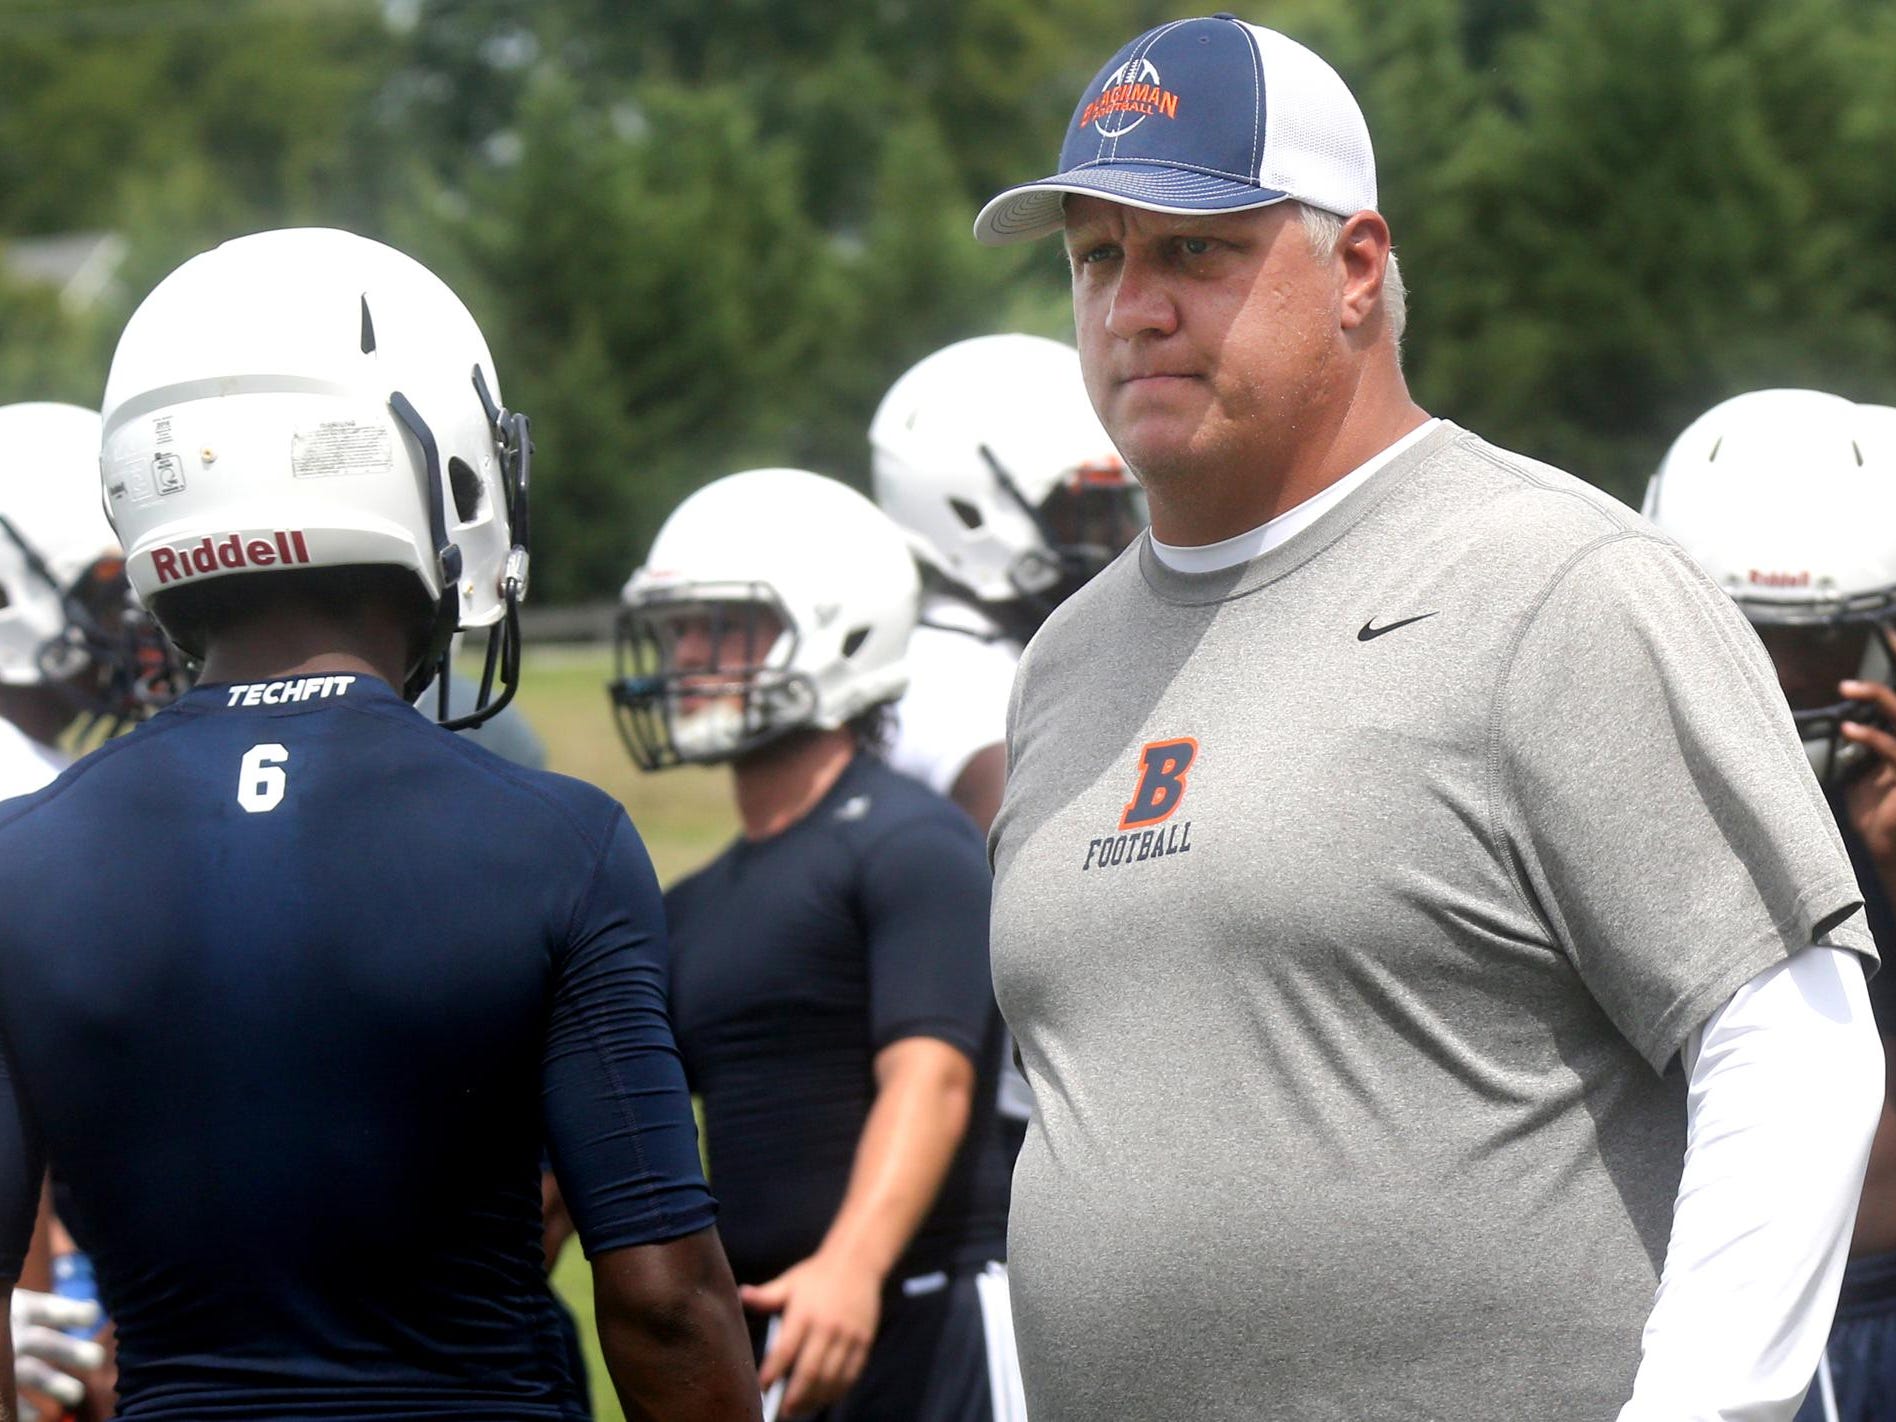 Blackman coach David Watson talks to a player during the Riverdale 7-on-7 tournament last week.